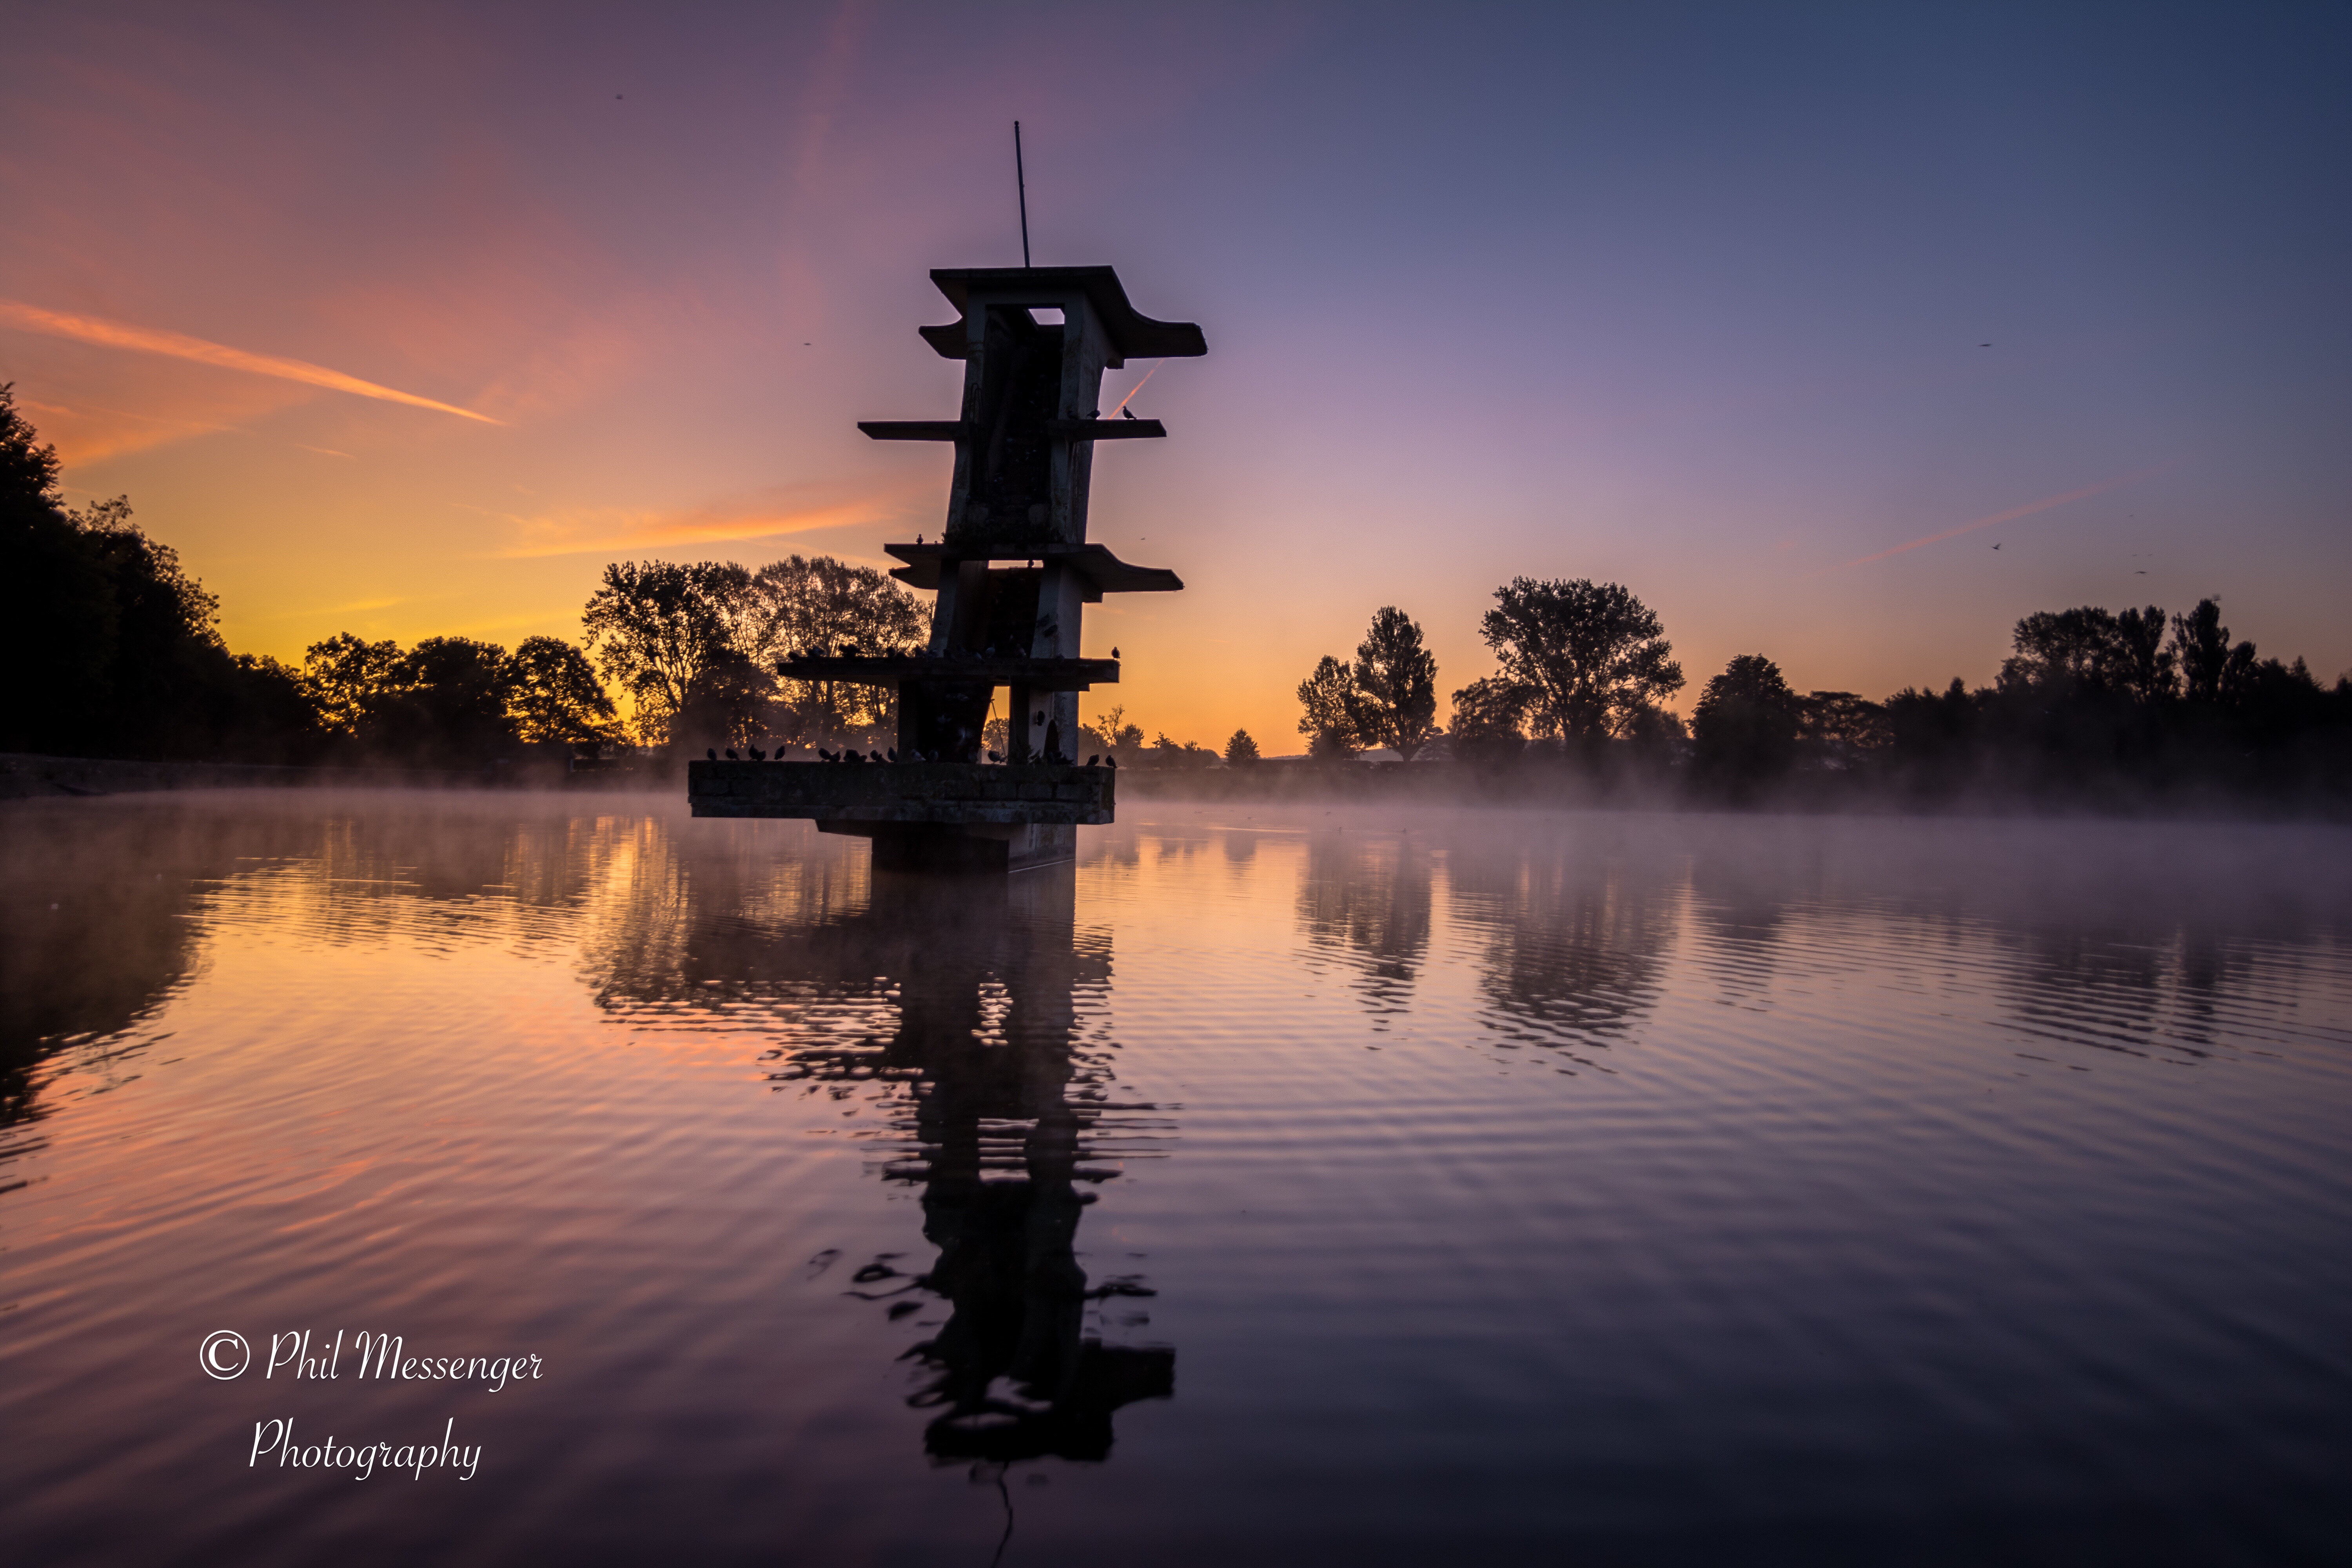 Another from my quick stop at Coate before work last Saturday, Coate Water diving board just before sunrise.